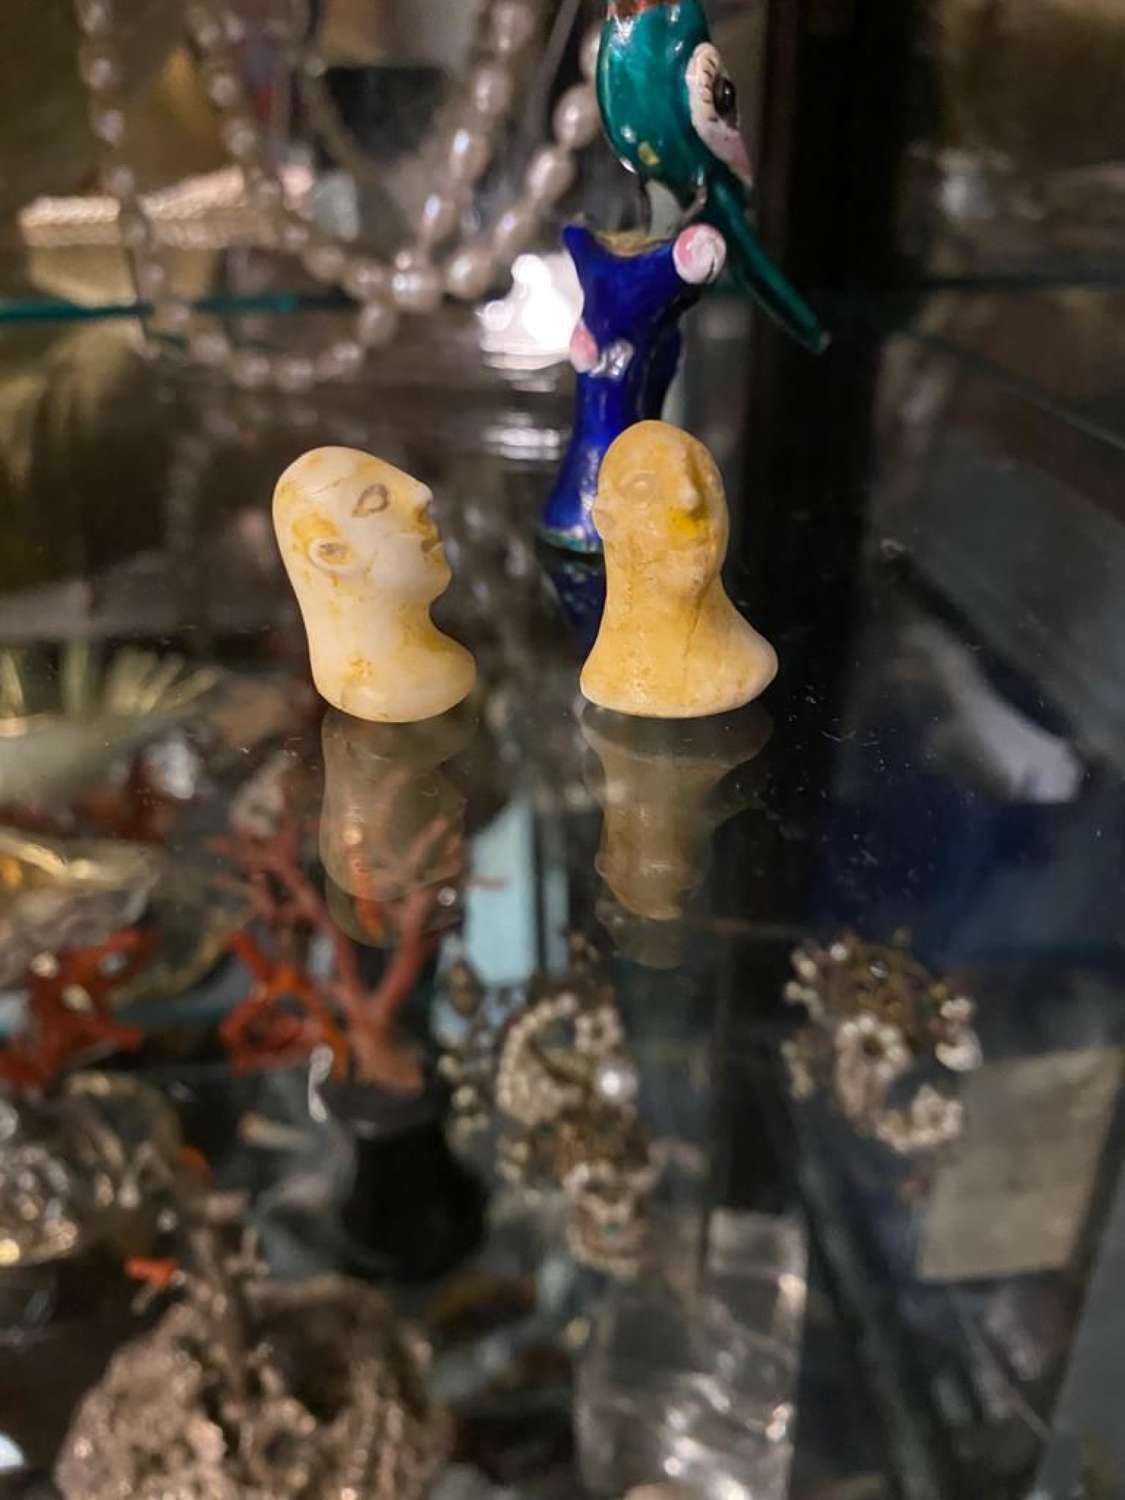 A pair of miniature near lithic style heads